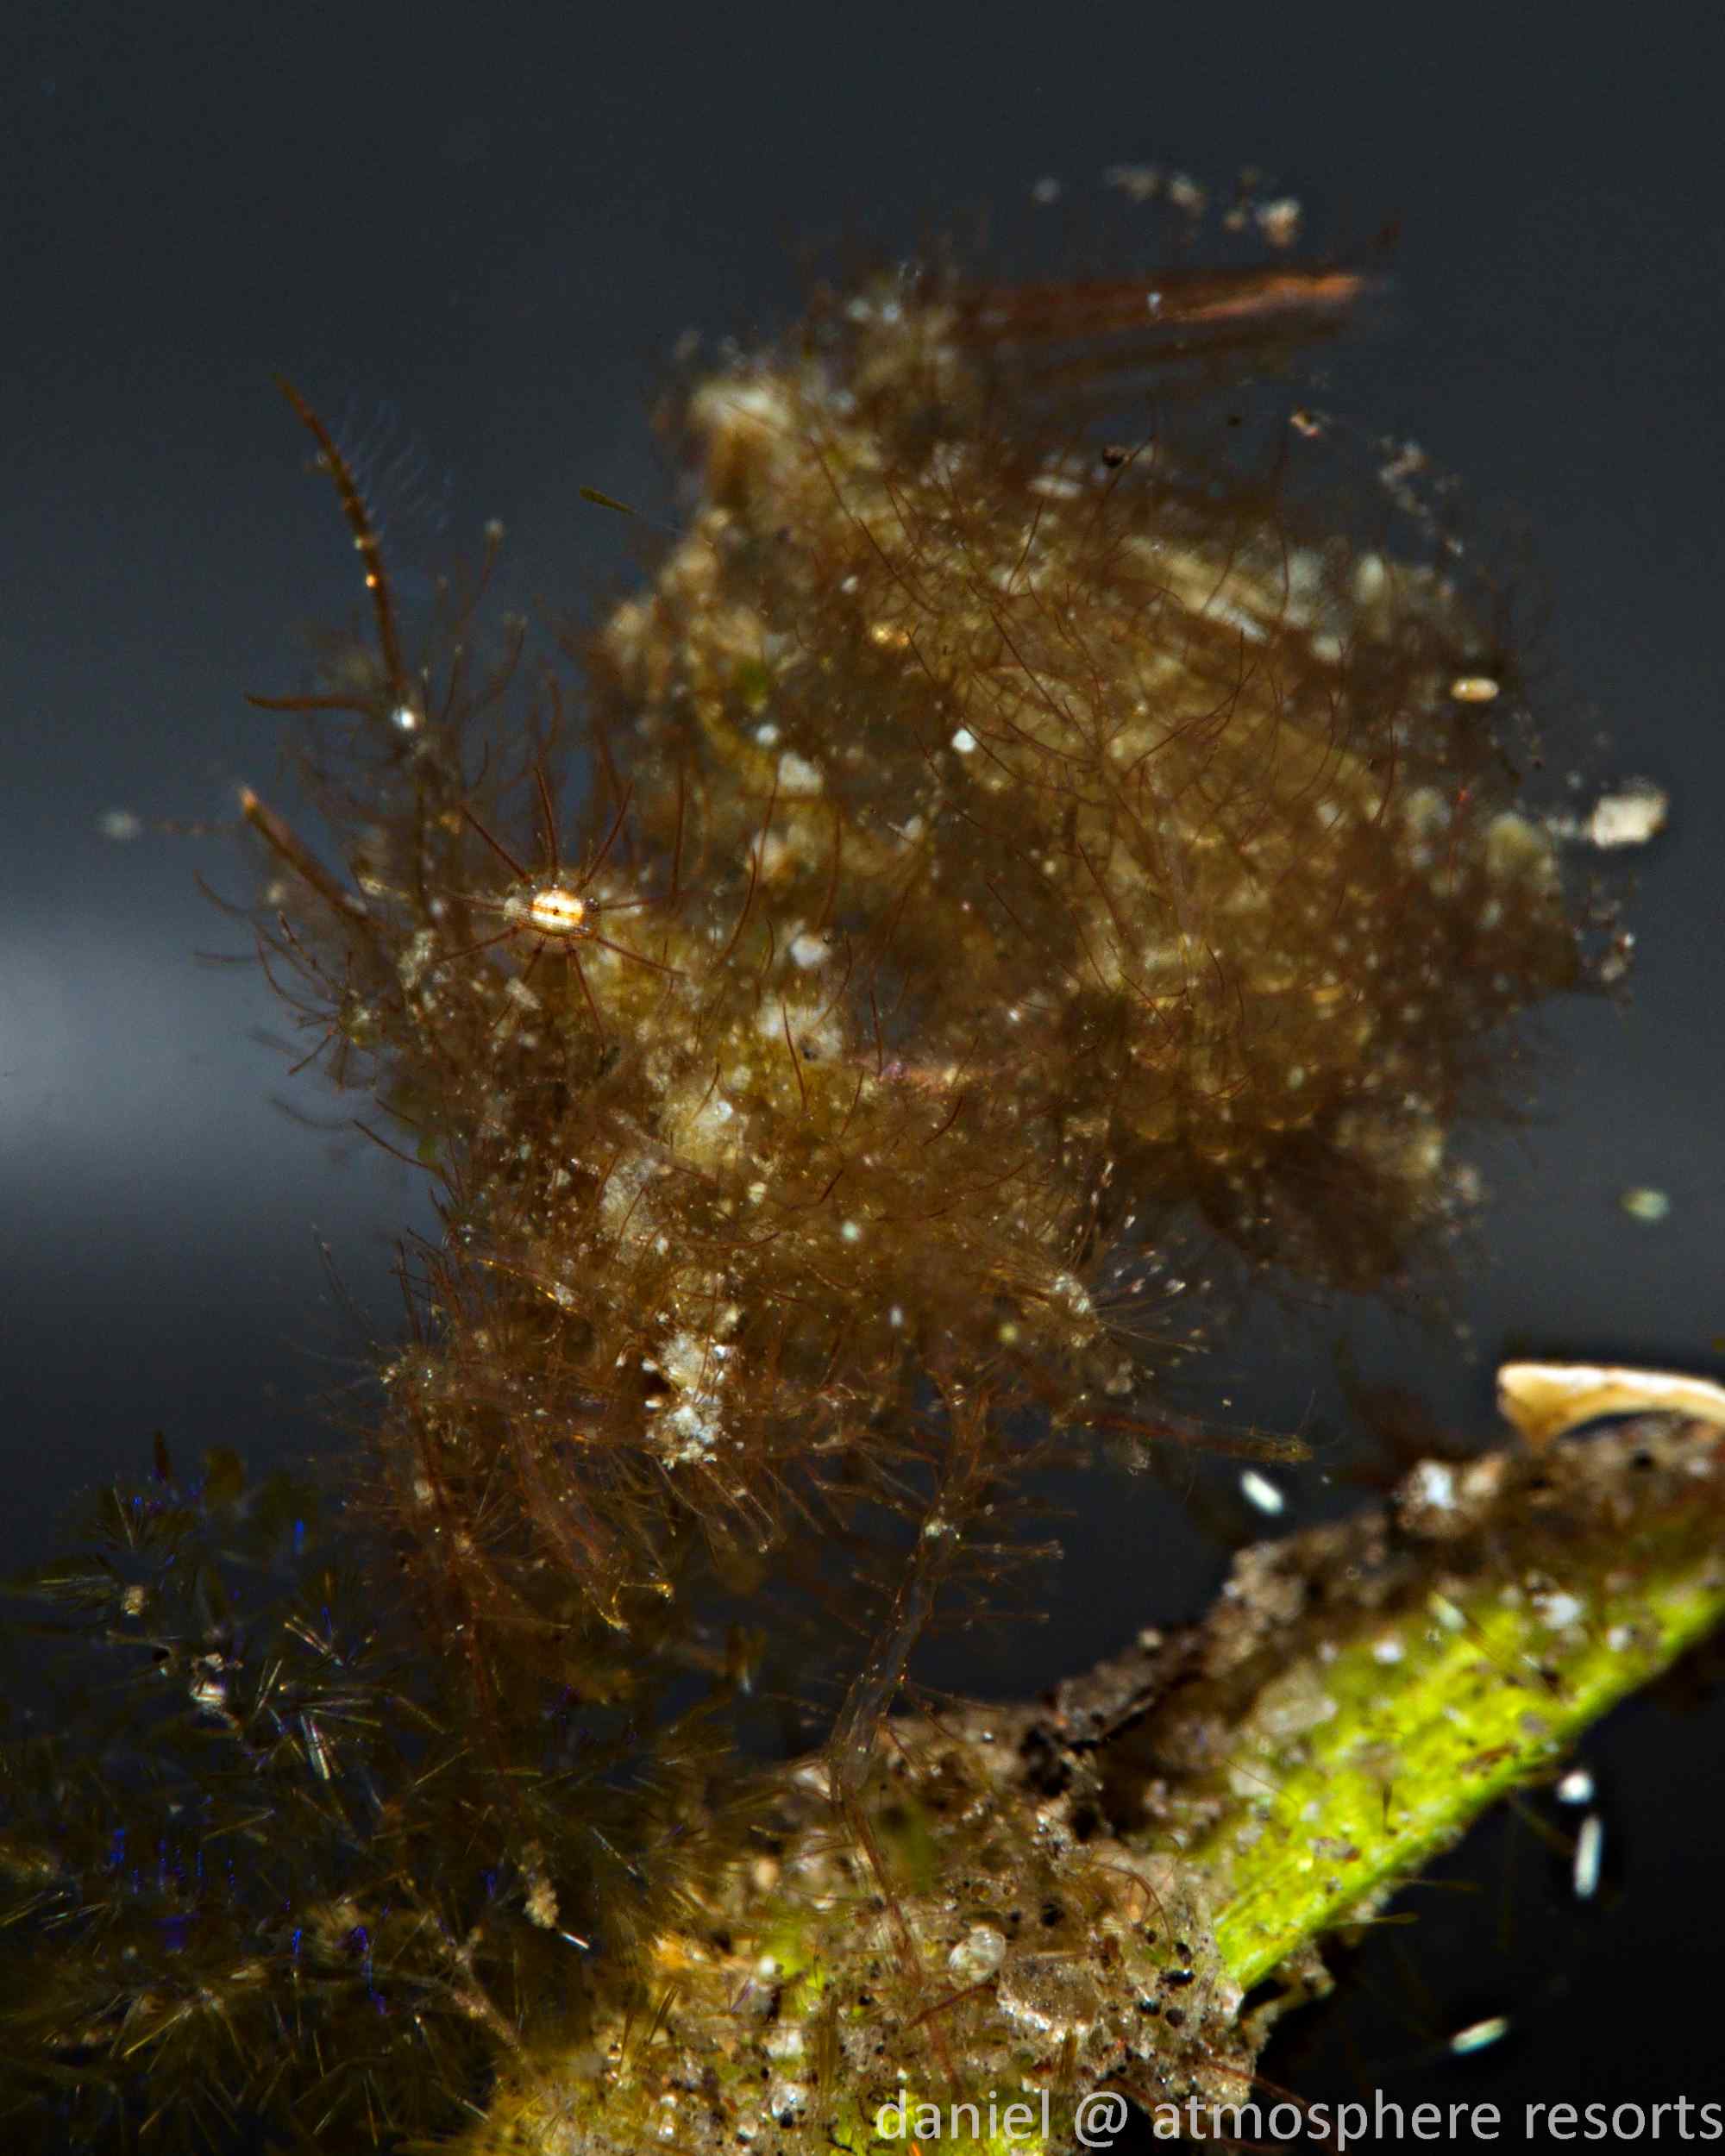 A picture of a brown hairy shrimp on a piece of seagrass